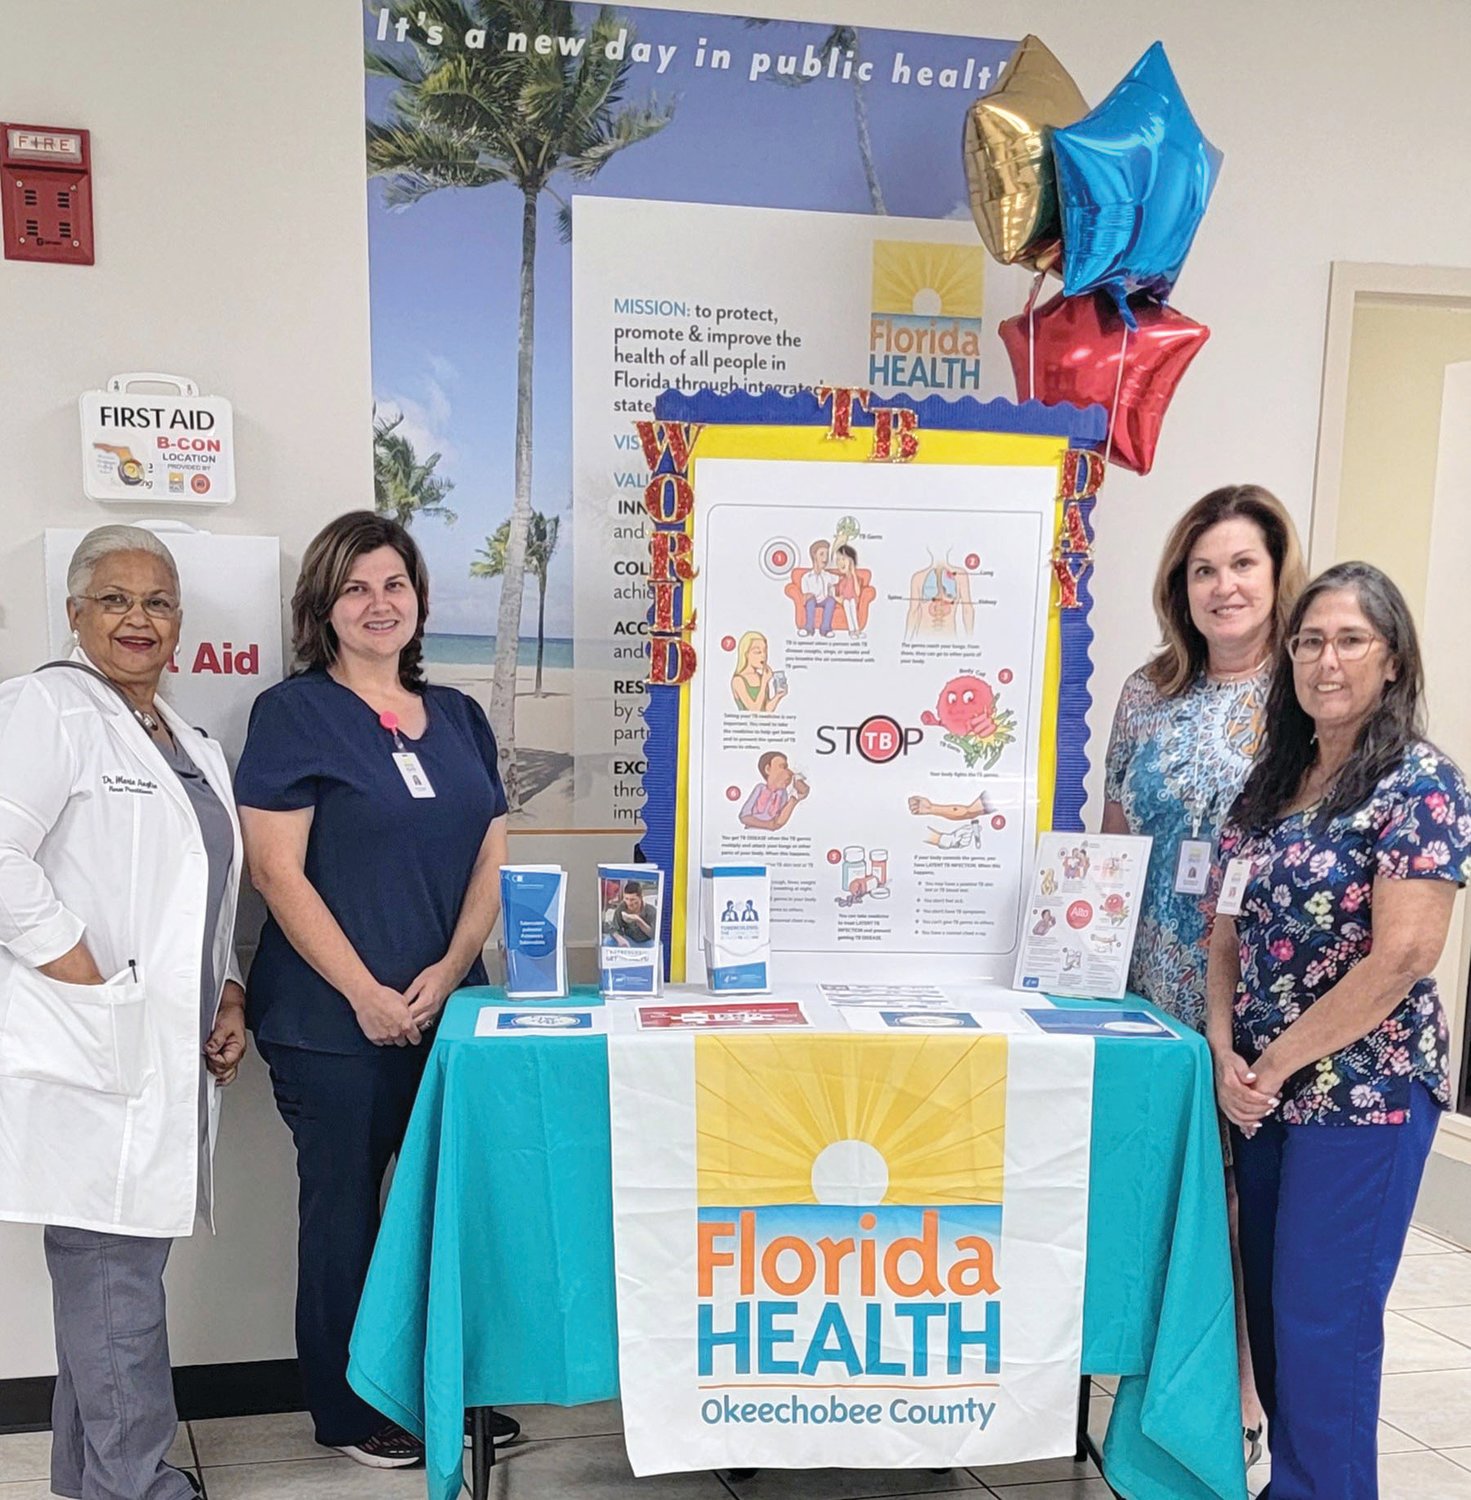 Pictured left to right: Dr. Marie Anglin, D.N.P., F.N. P-C; Danielle Stevens, R.N.; Vickie Elkins, R.N. Director of Nursing; and Patricia Pelayo, R.N. Community Health Supervisor.